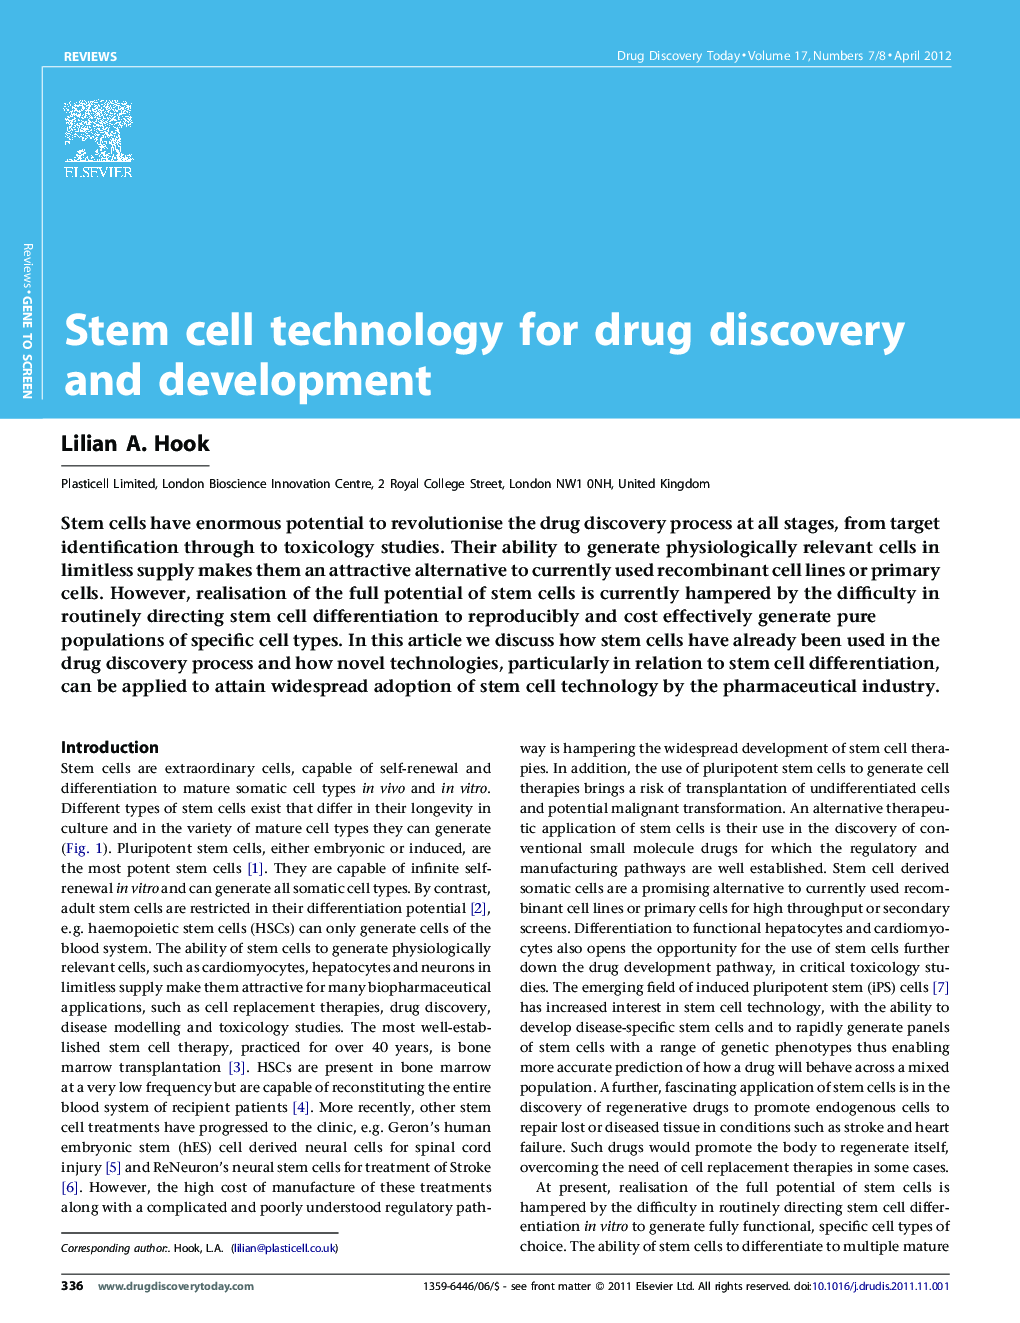 Stem cell technology for drug discovery and development